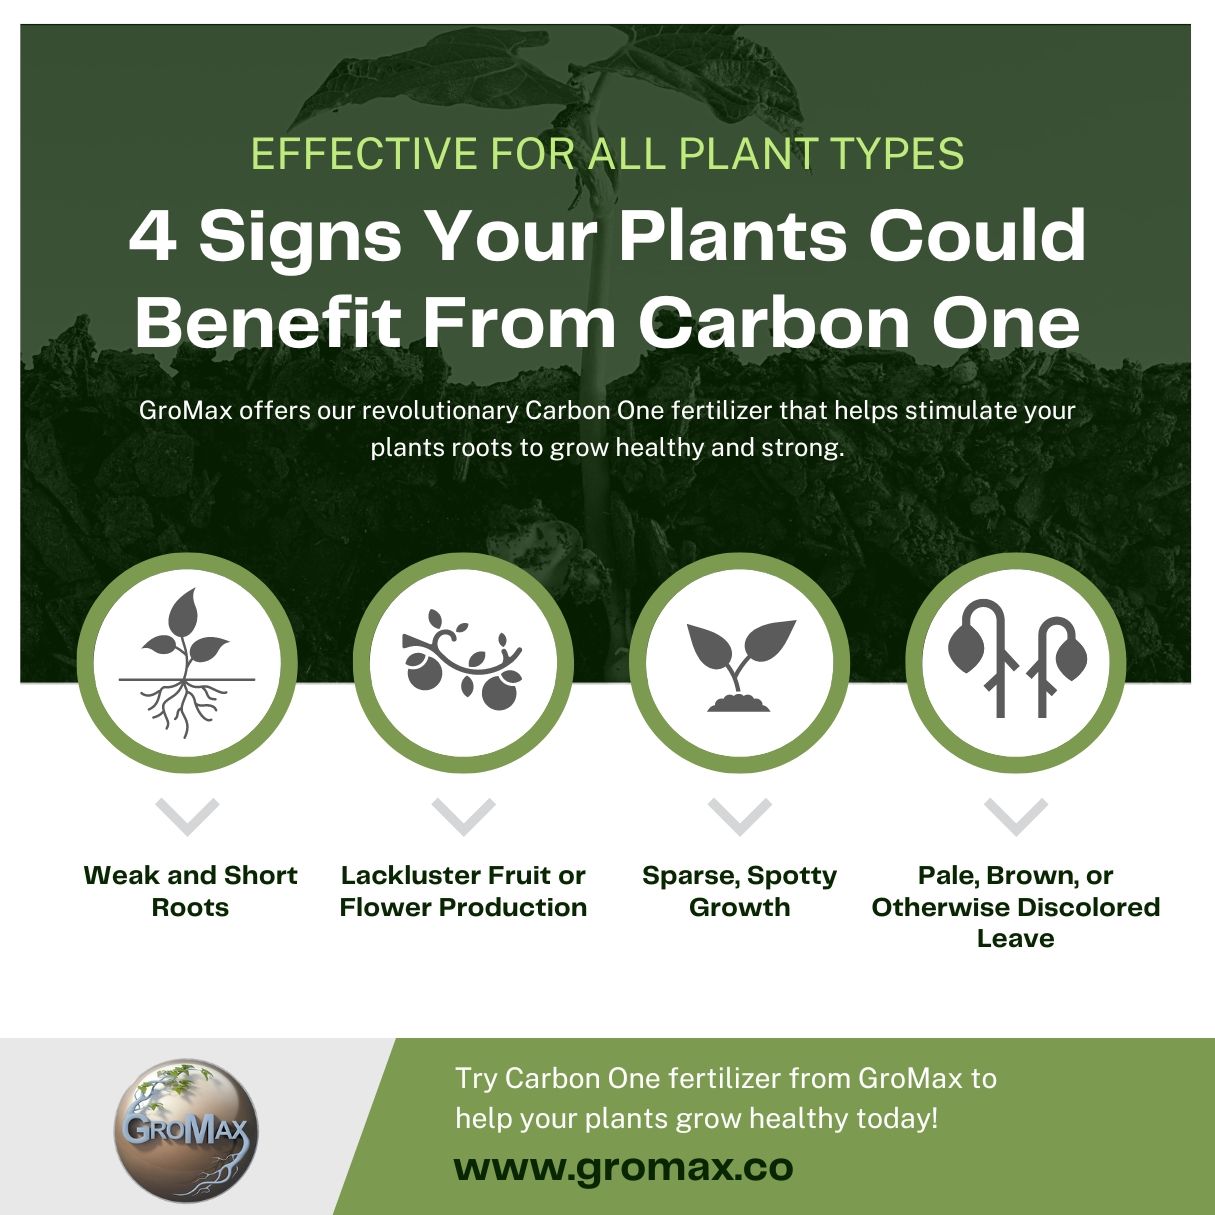 4 Signs Your Plants Could Benefit From Carbon One Infographic